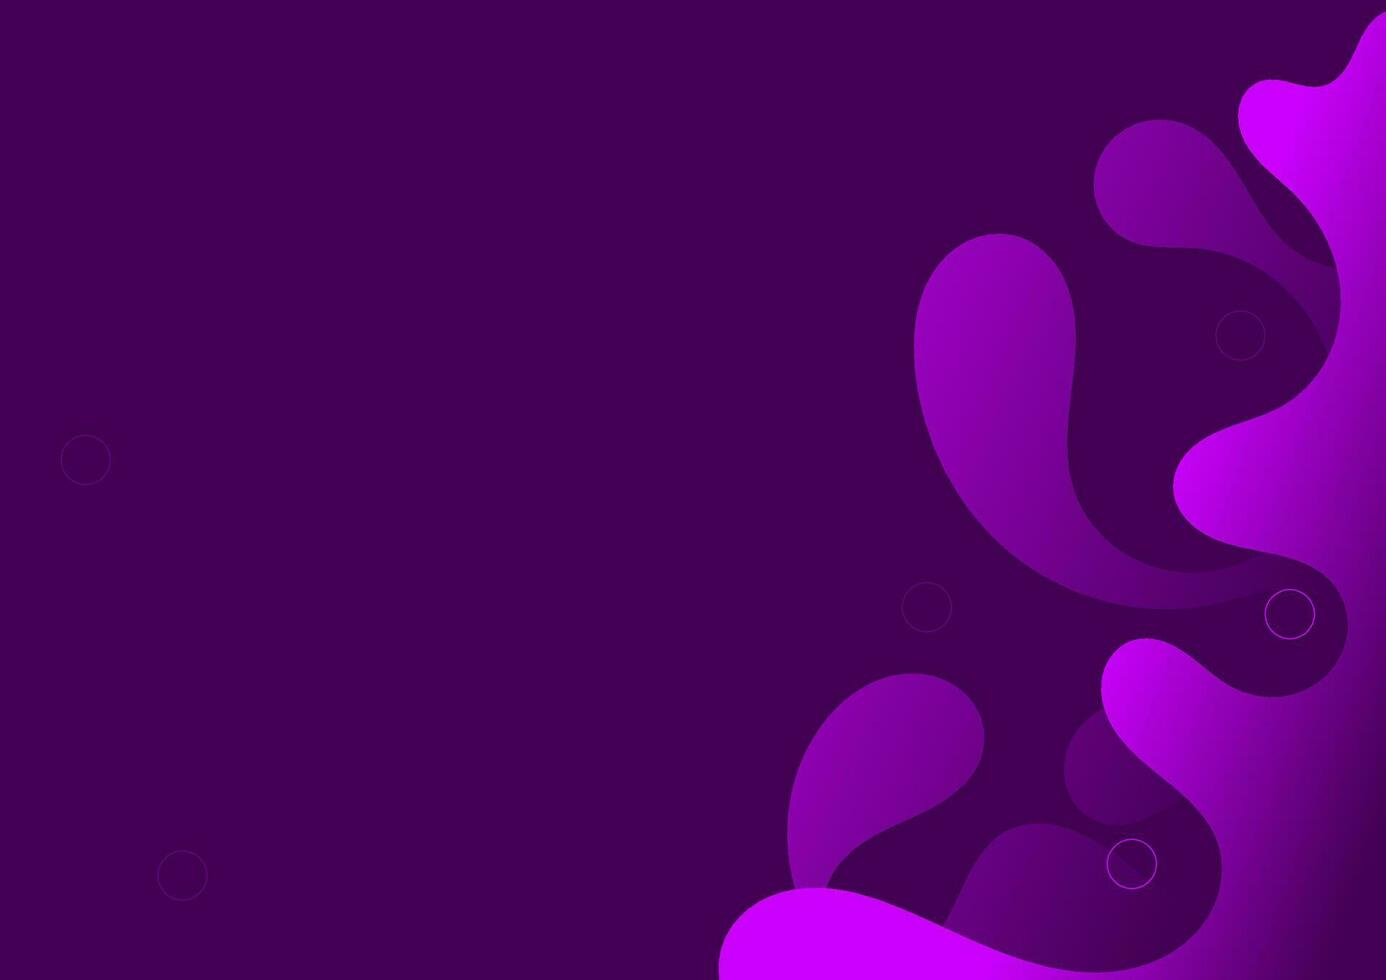 Abstract vector background. Purple-colored with wave patterns. Featuring a copy space area. Suitable for presentation slides, banners, homepages, websites, covers, and wallpapers.